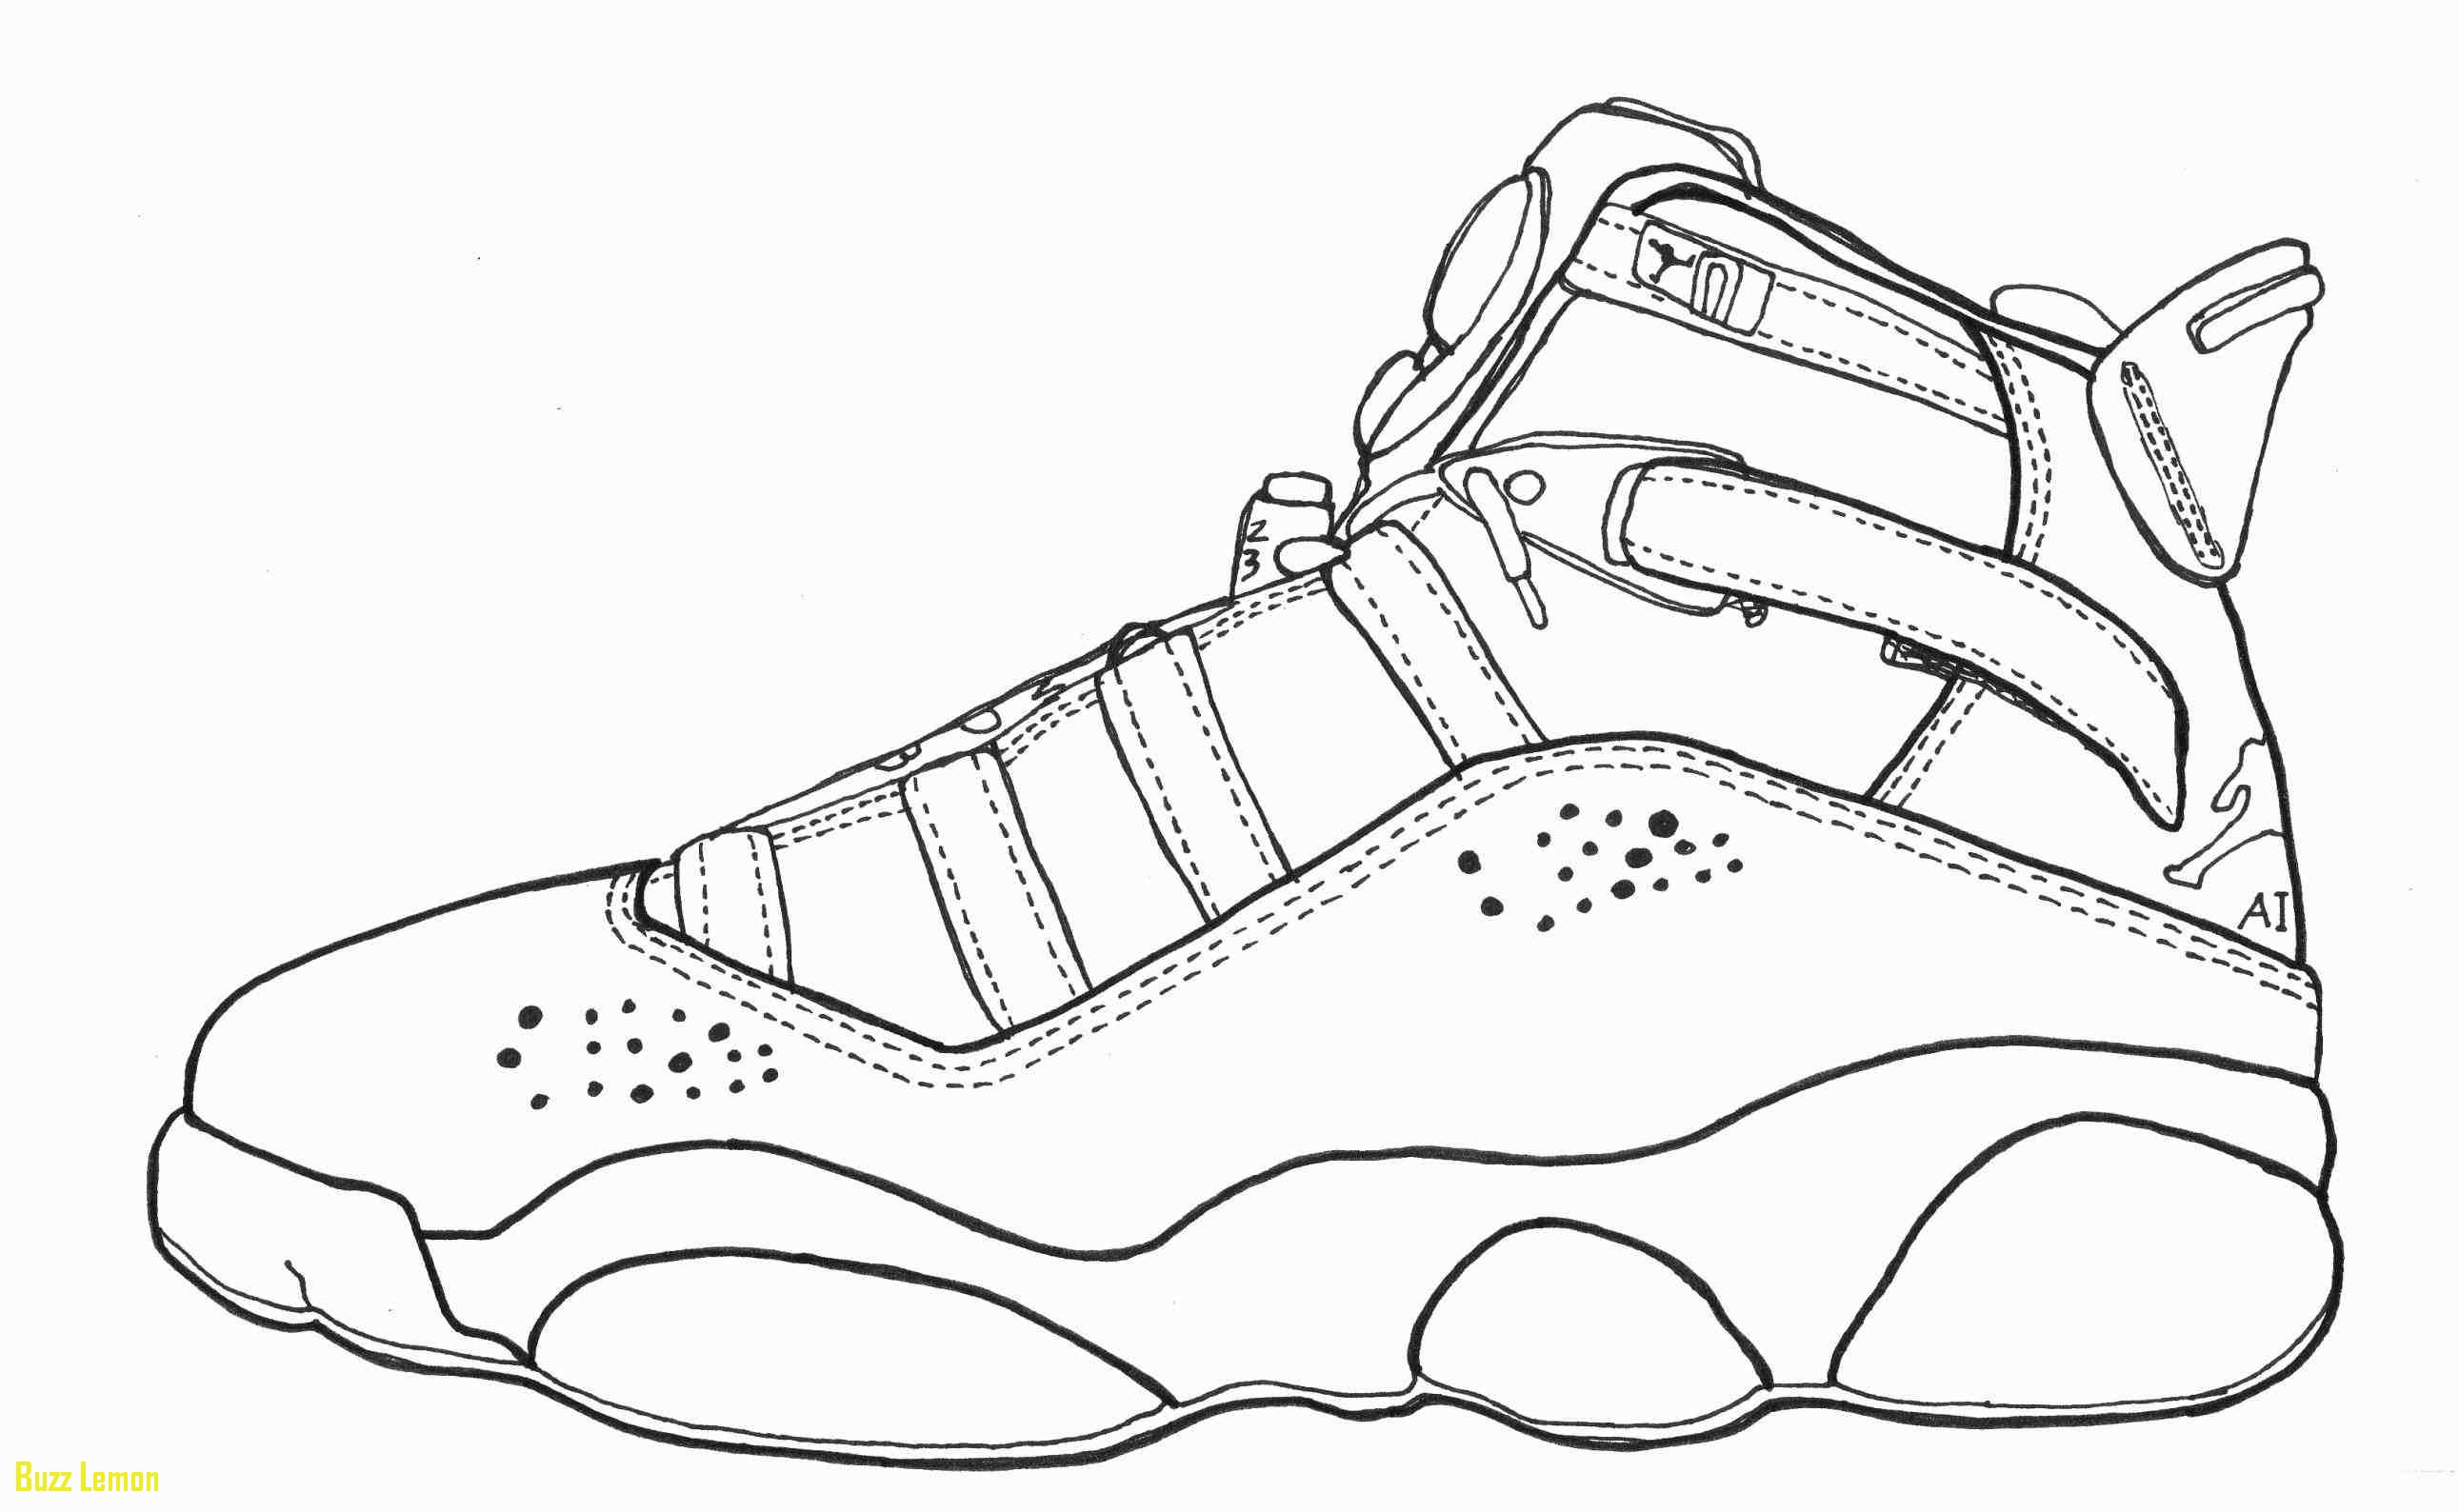 Kd Shoes Coloring Pages at GetColorings.com | Free printable colorings